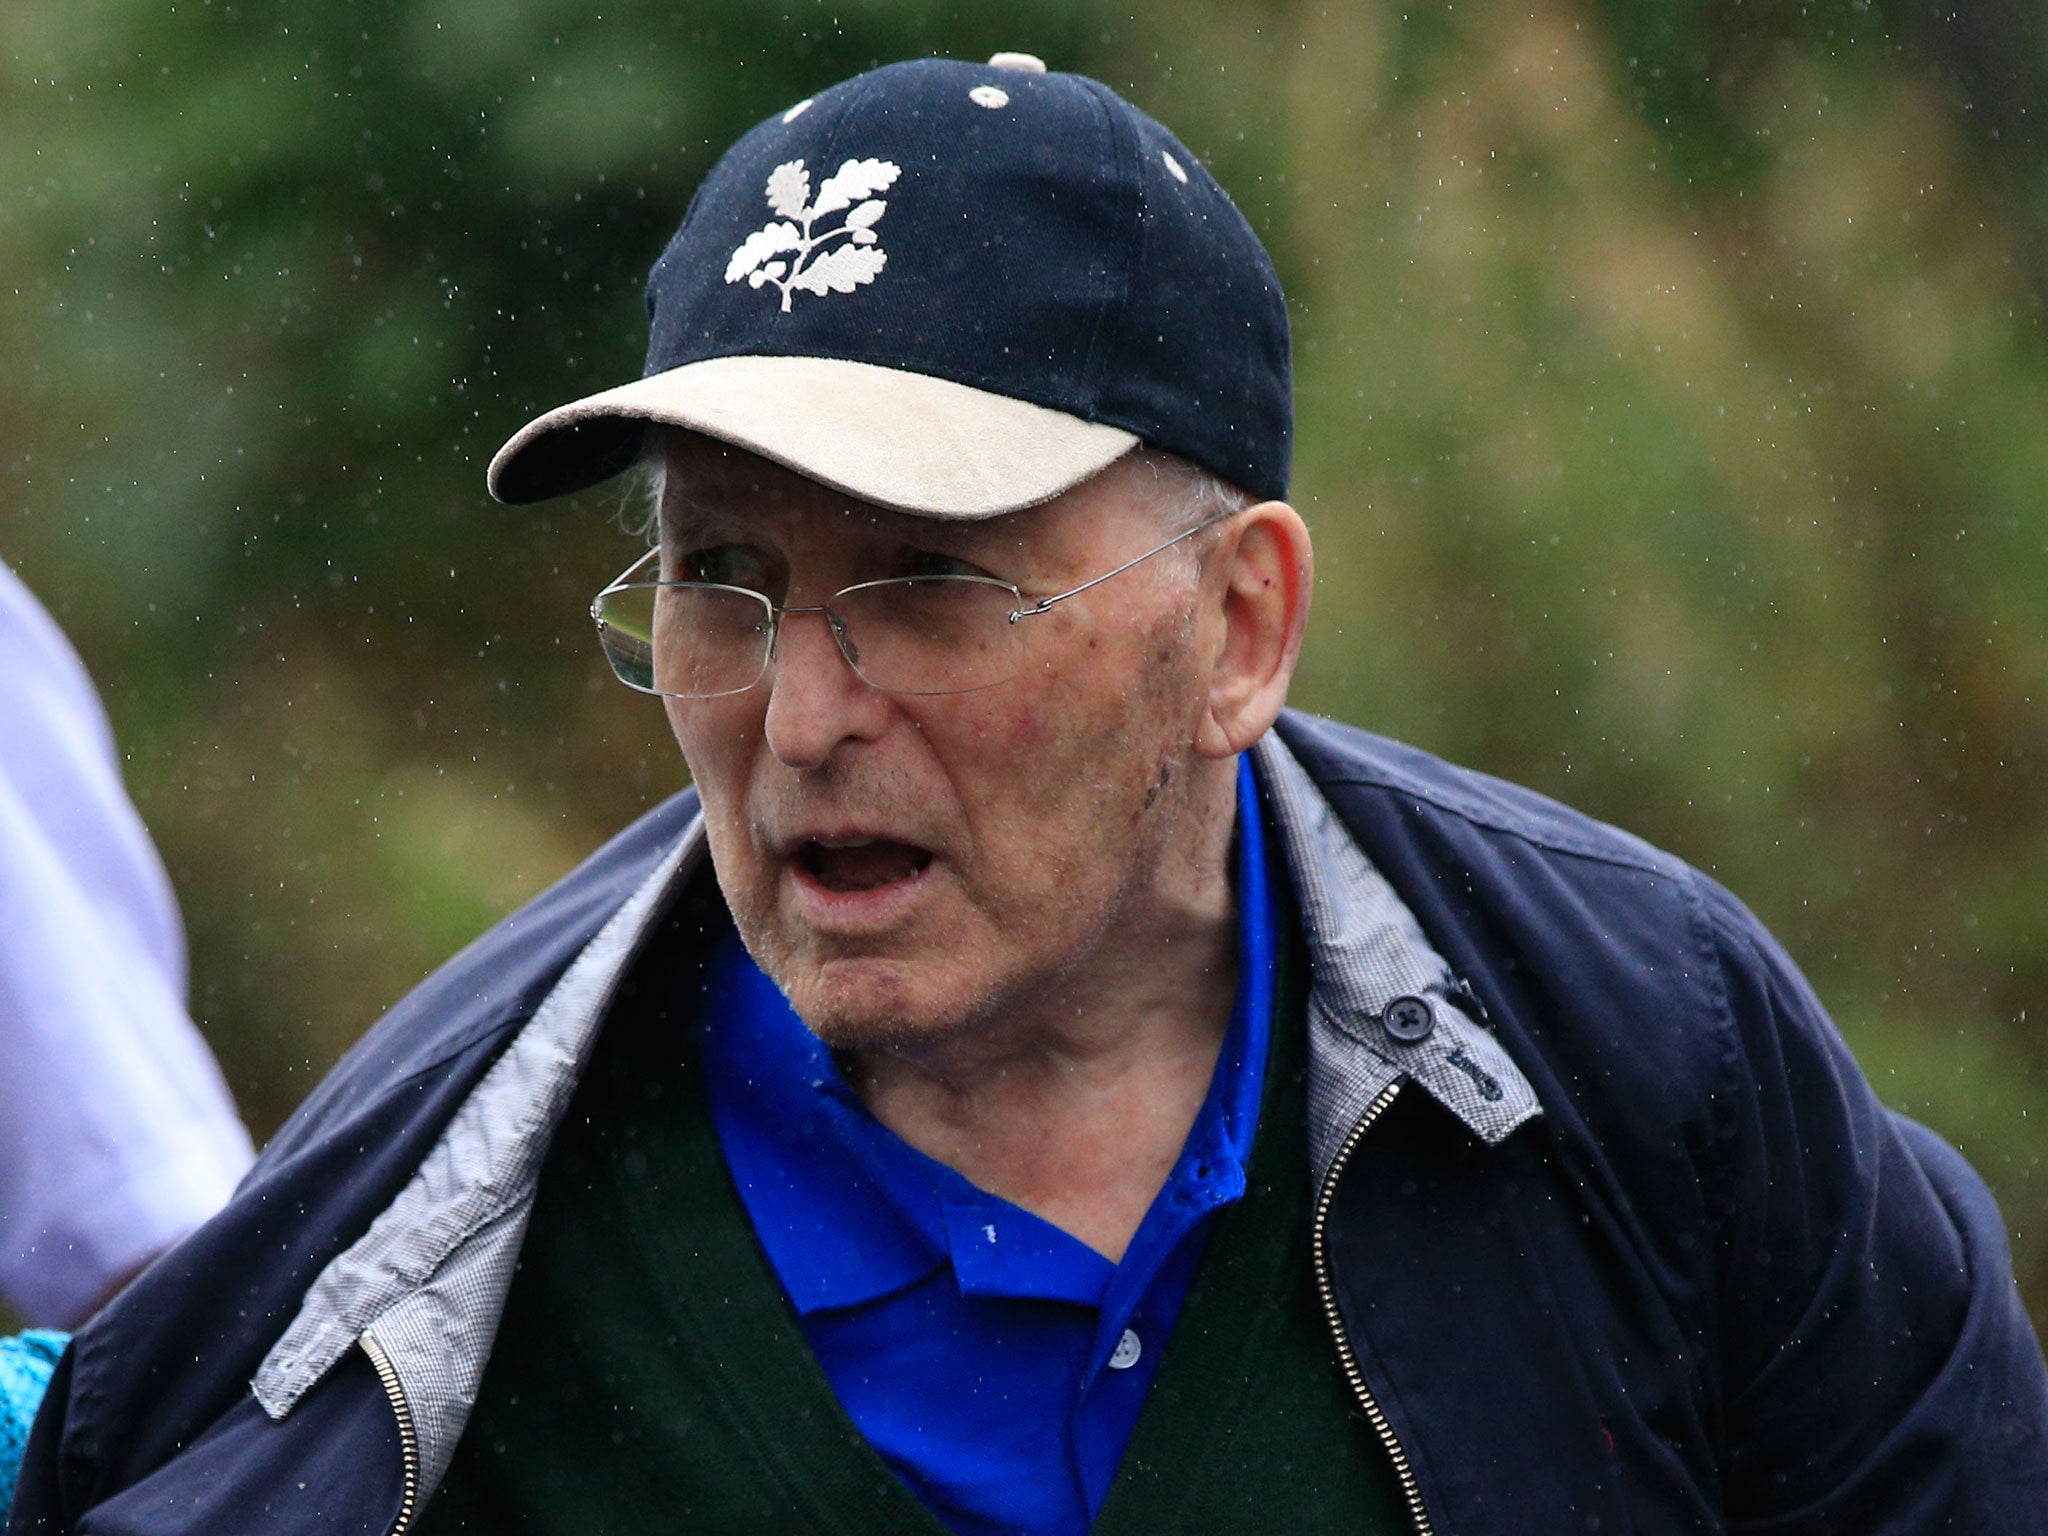 Lord Janner was ruled unfit to stand trial for historical sex offences